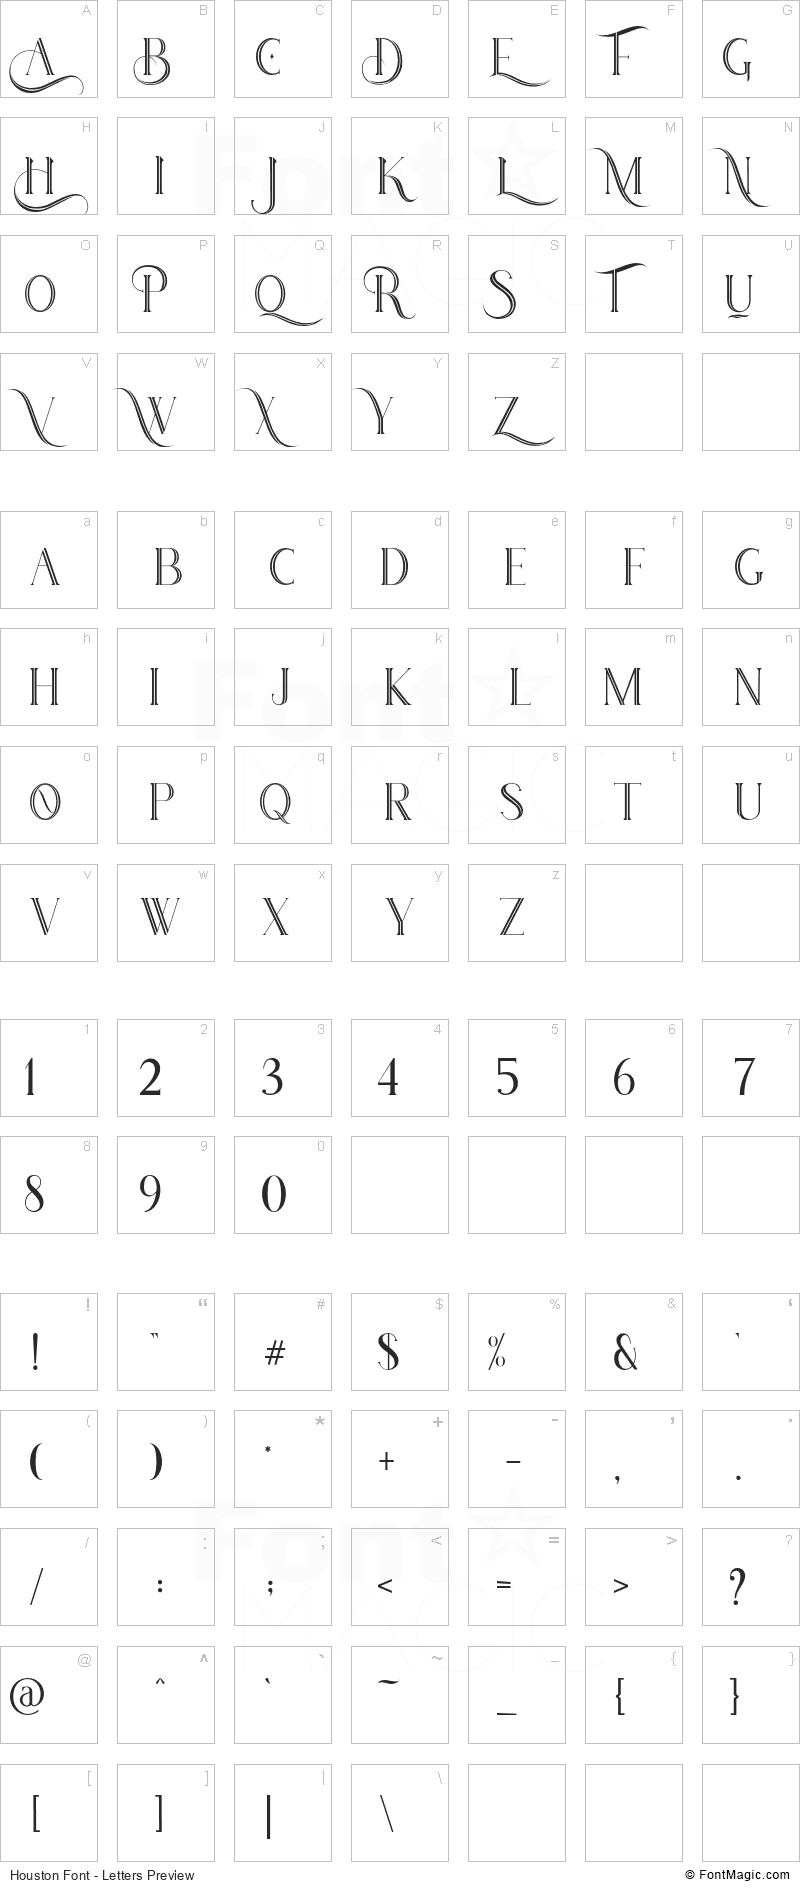 Houston Font - All Latters Preview Chart